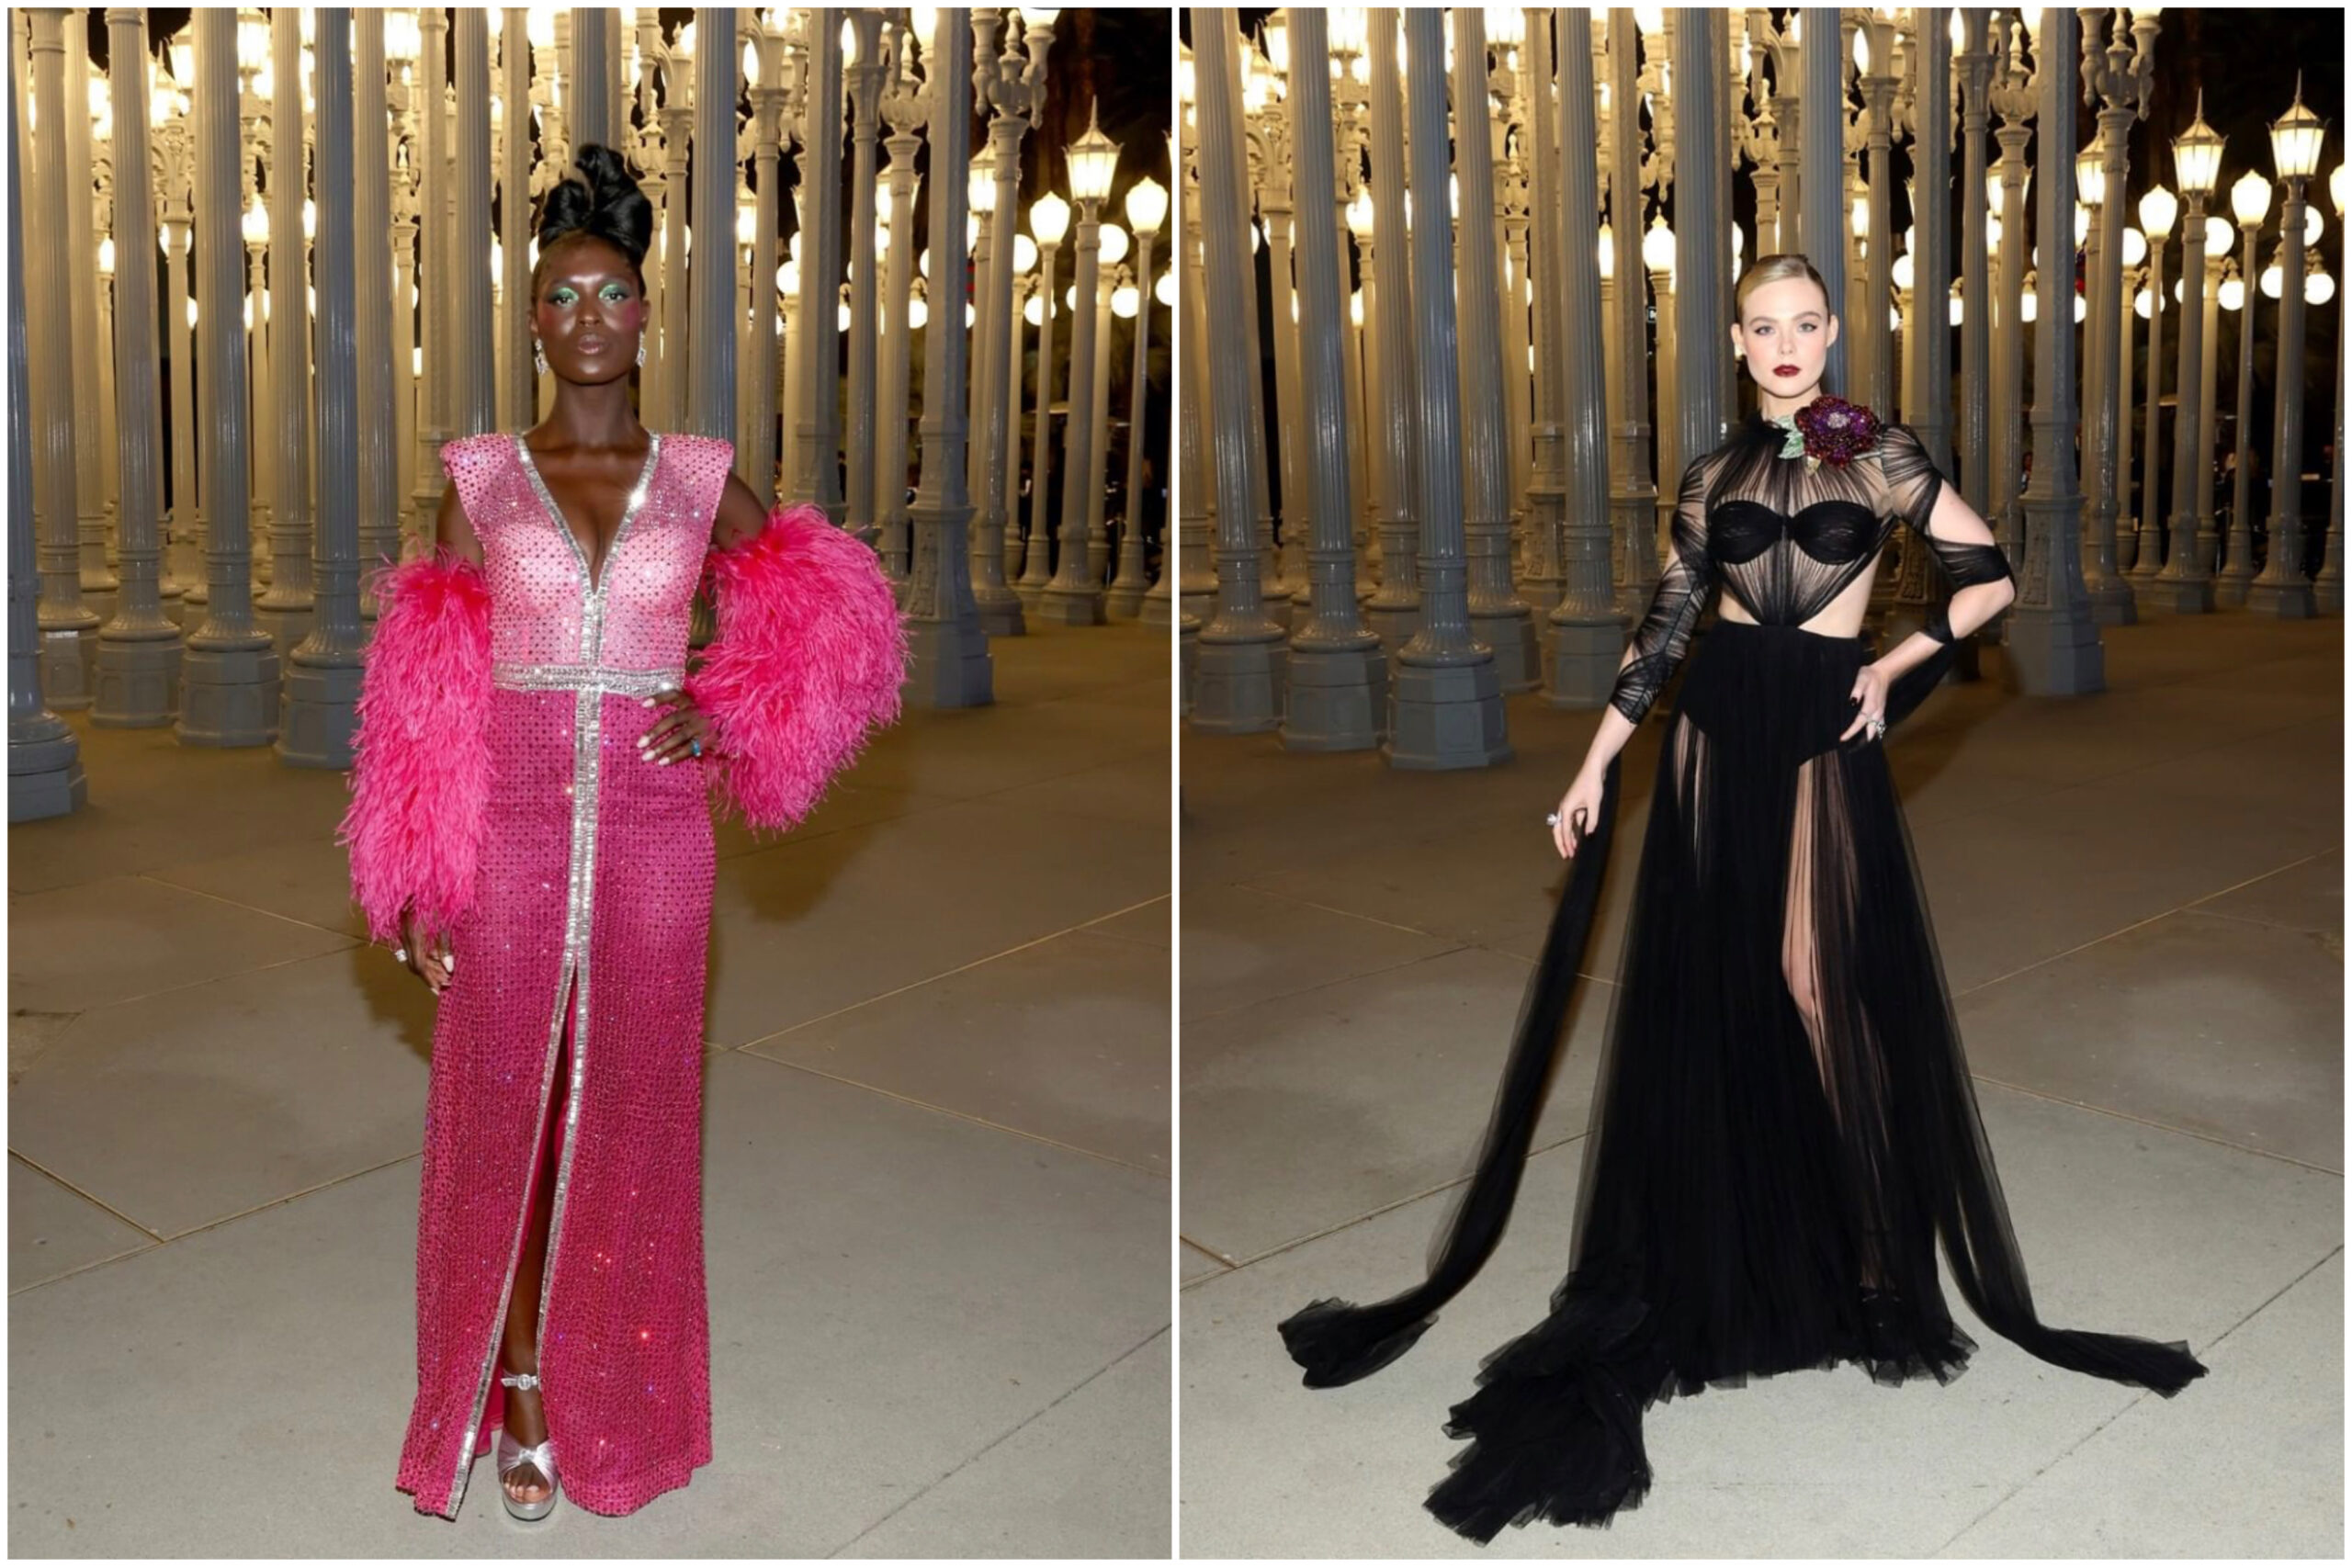 The Best Looks at LACMA Art+Film Gala Red Carpet, celebrity trending styles, gucci, elle fannie, jodie turner-smith